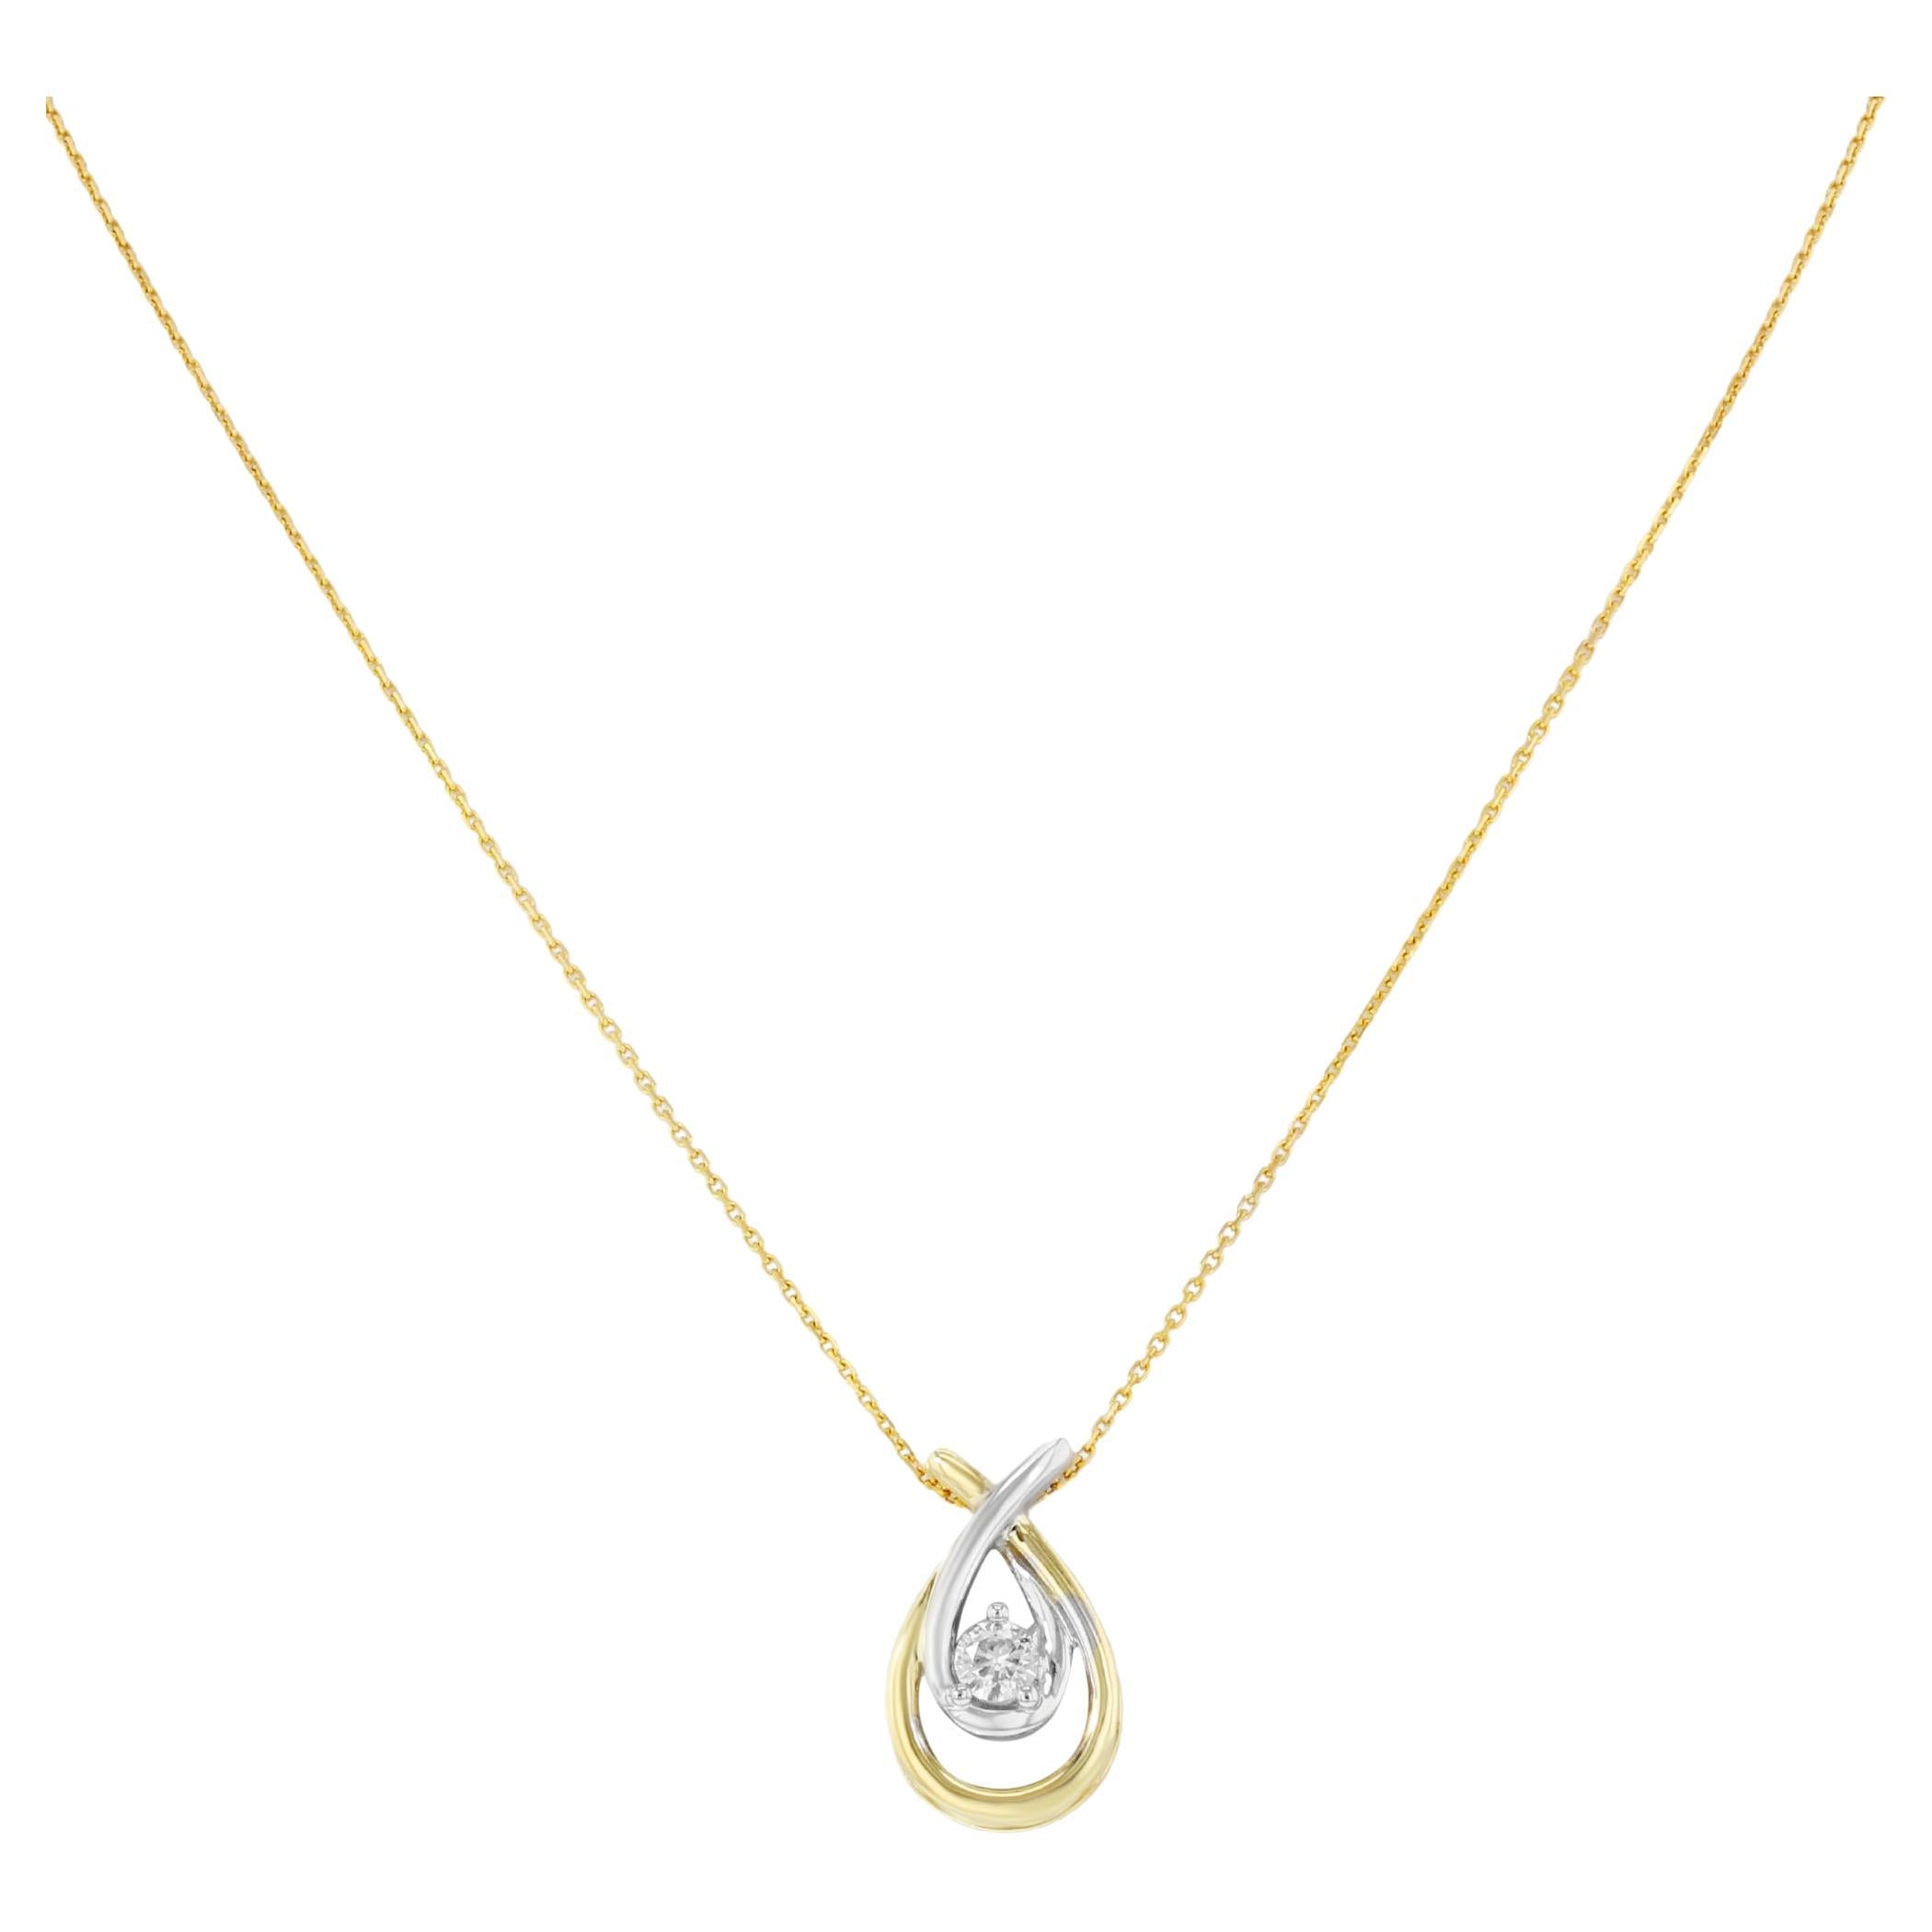 This gorgeous necklace comes in 14k yellow gold chain with 10k yellow & white gold pendant encrusted with 0.15 cttw diamond. Length of the necklace: 18 inches, pendant: 19mm, total weight 2.9 gms. Comes with a gift box and an appraisal card.